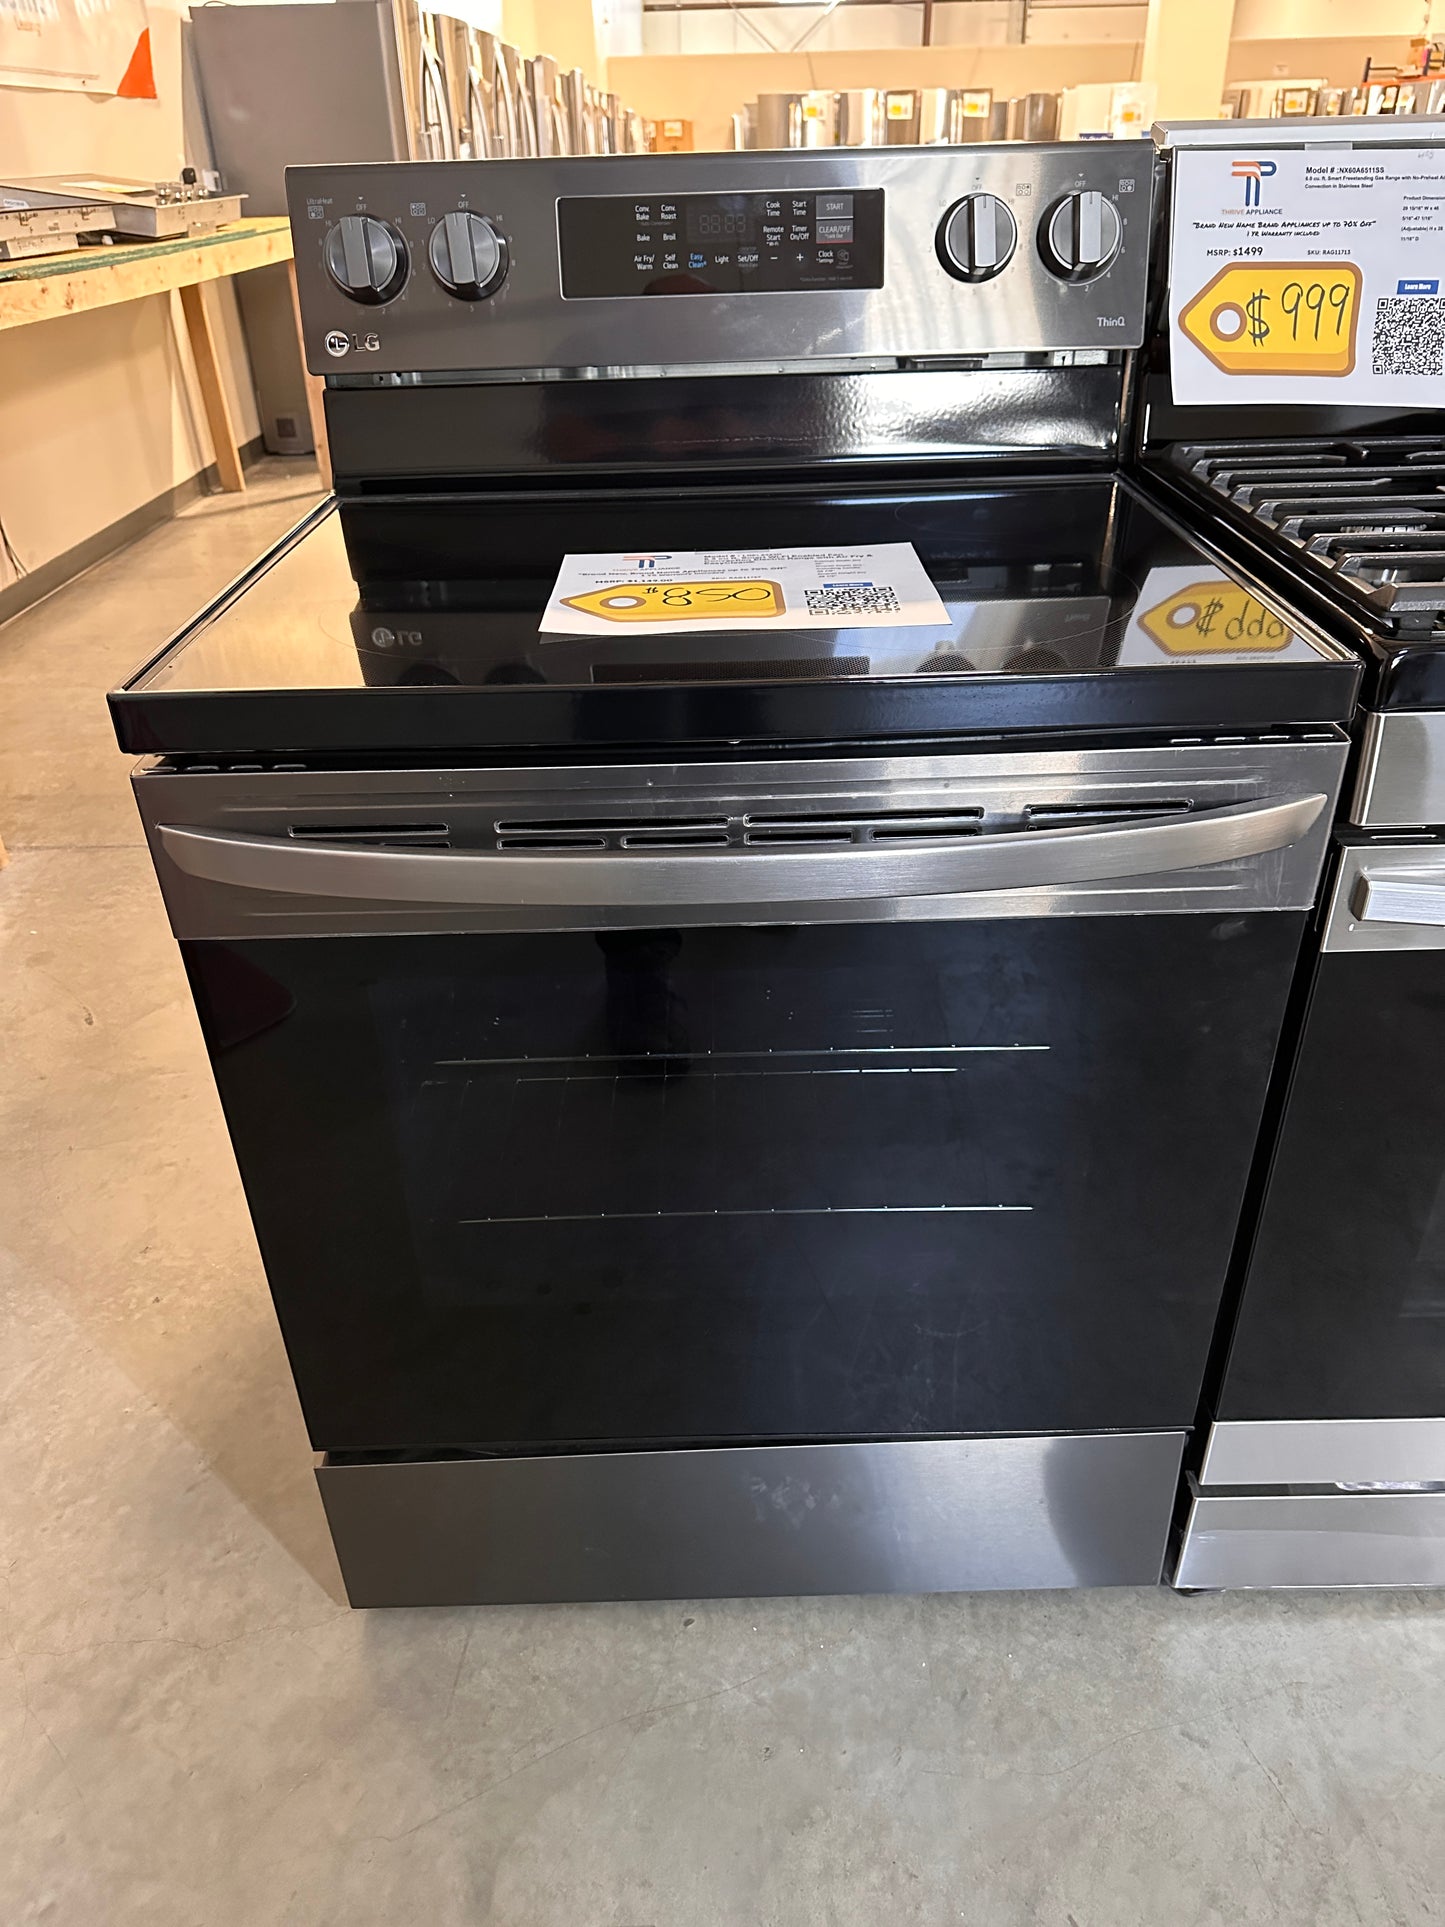 Range with Easy Clean, Air Fry and WideView Window - Black Stainless Model:LREL6323D  RAG11727